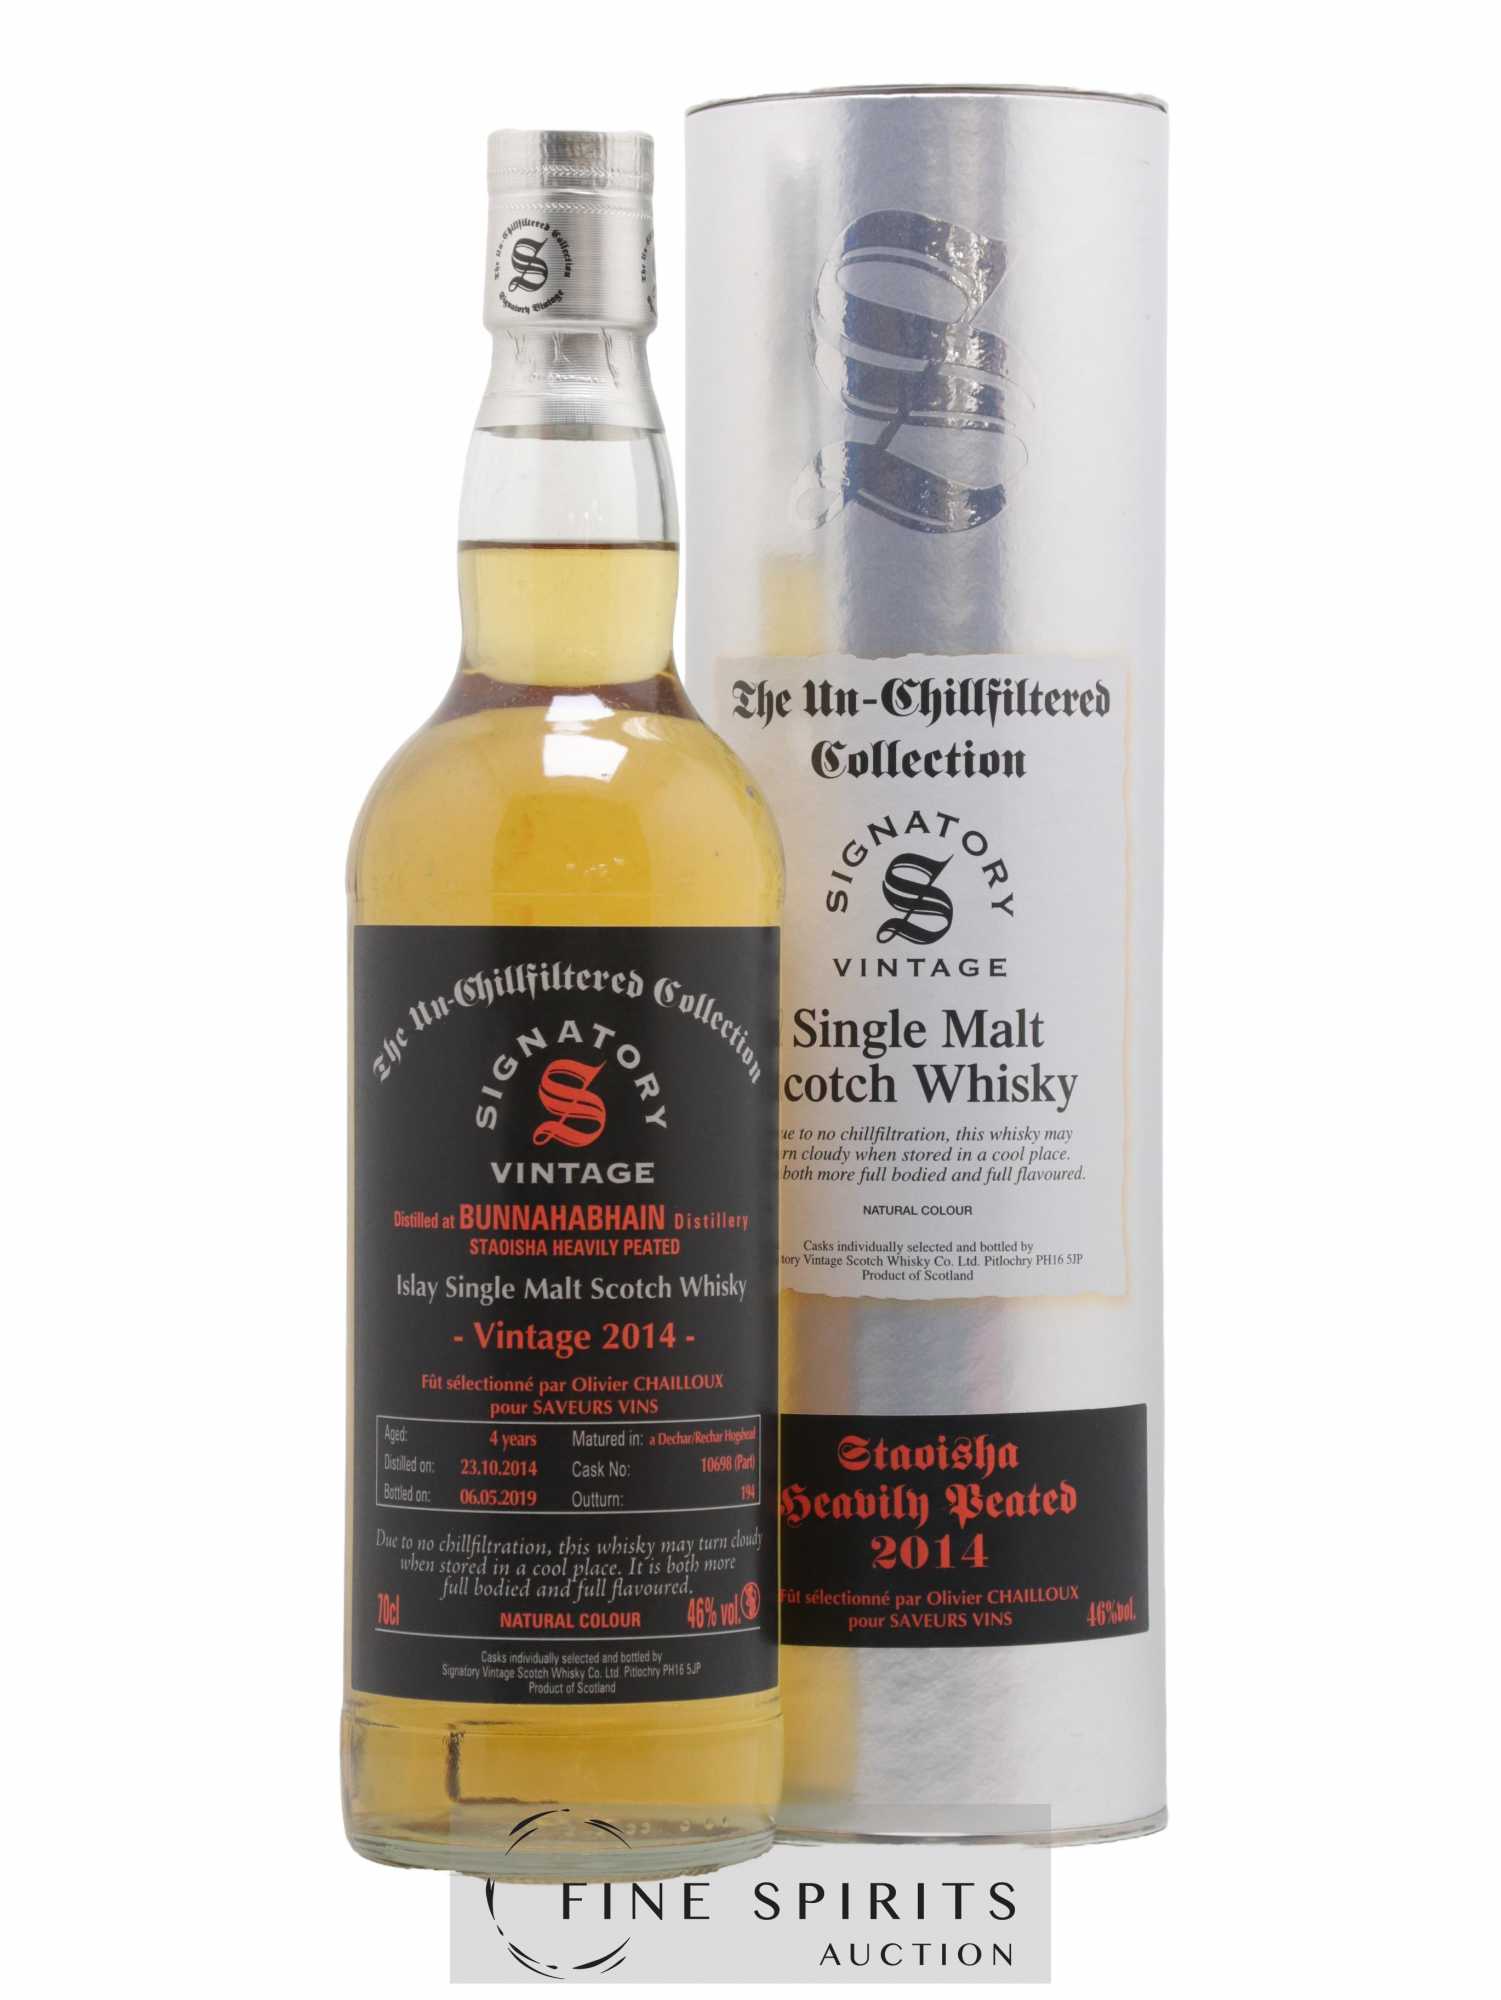 Bunnahabhain 4 years 2014 Signatory Vintage Cask n°10698(part) - One of 194 - bottled 2019 Saveurs Vins The Un-Chillfiltered Collection